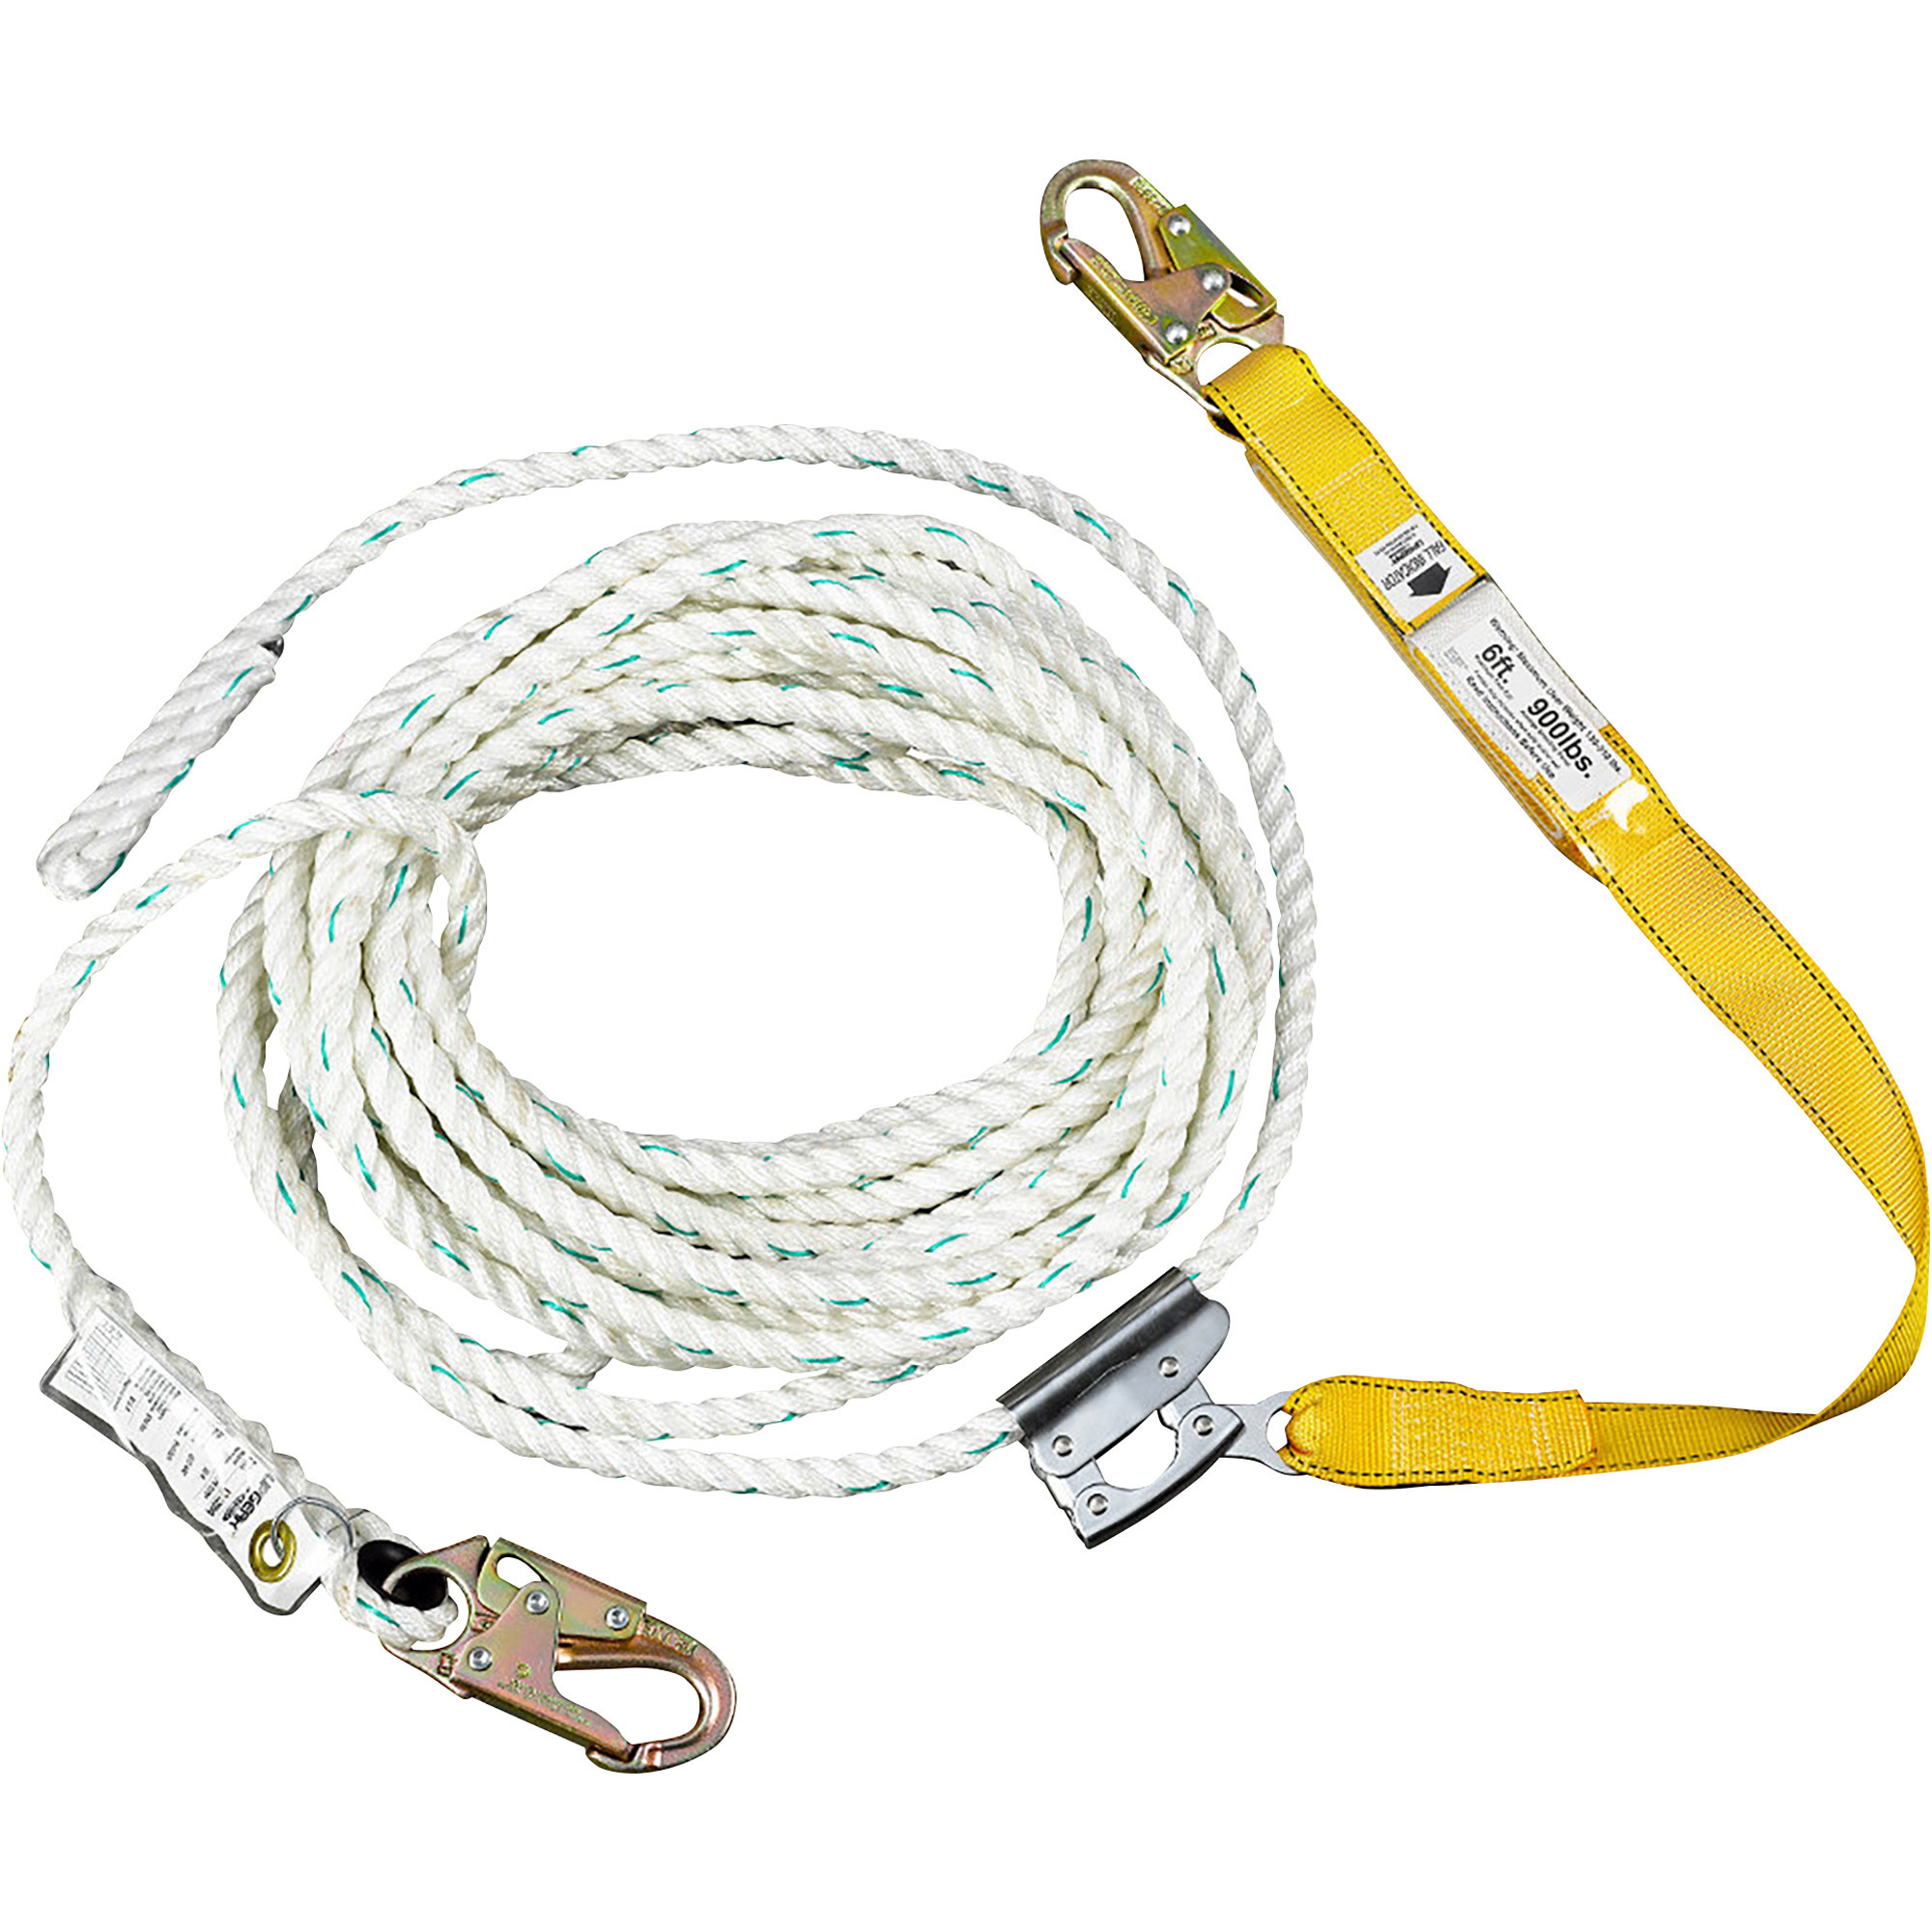 Werner Lifeline with Manual Rope, 50ft.L, ModelL232050C